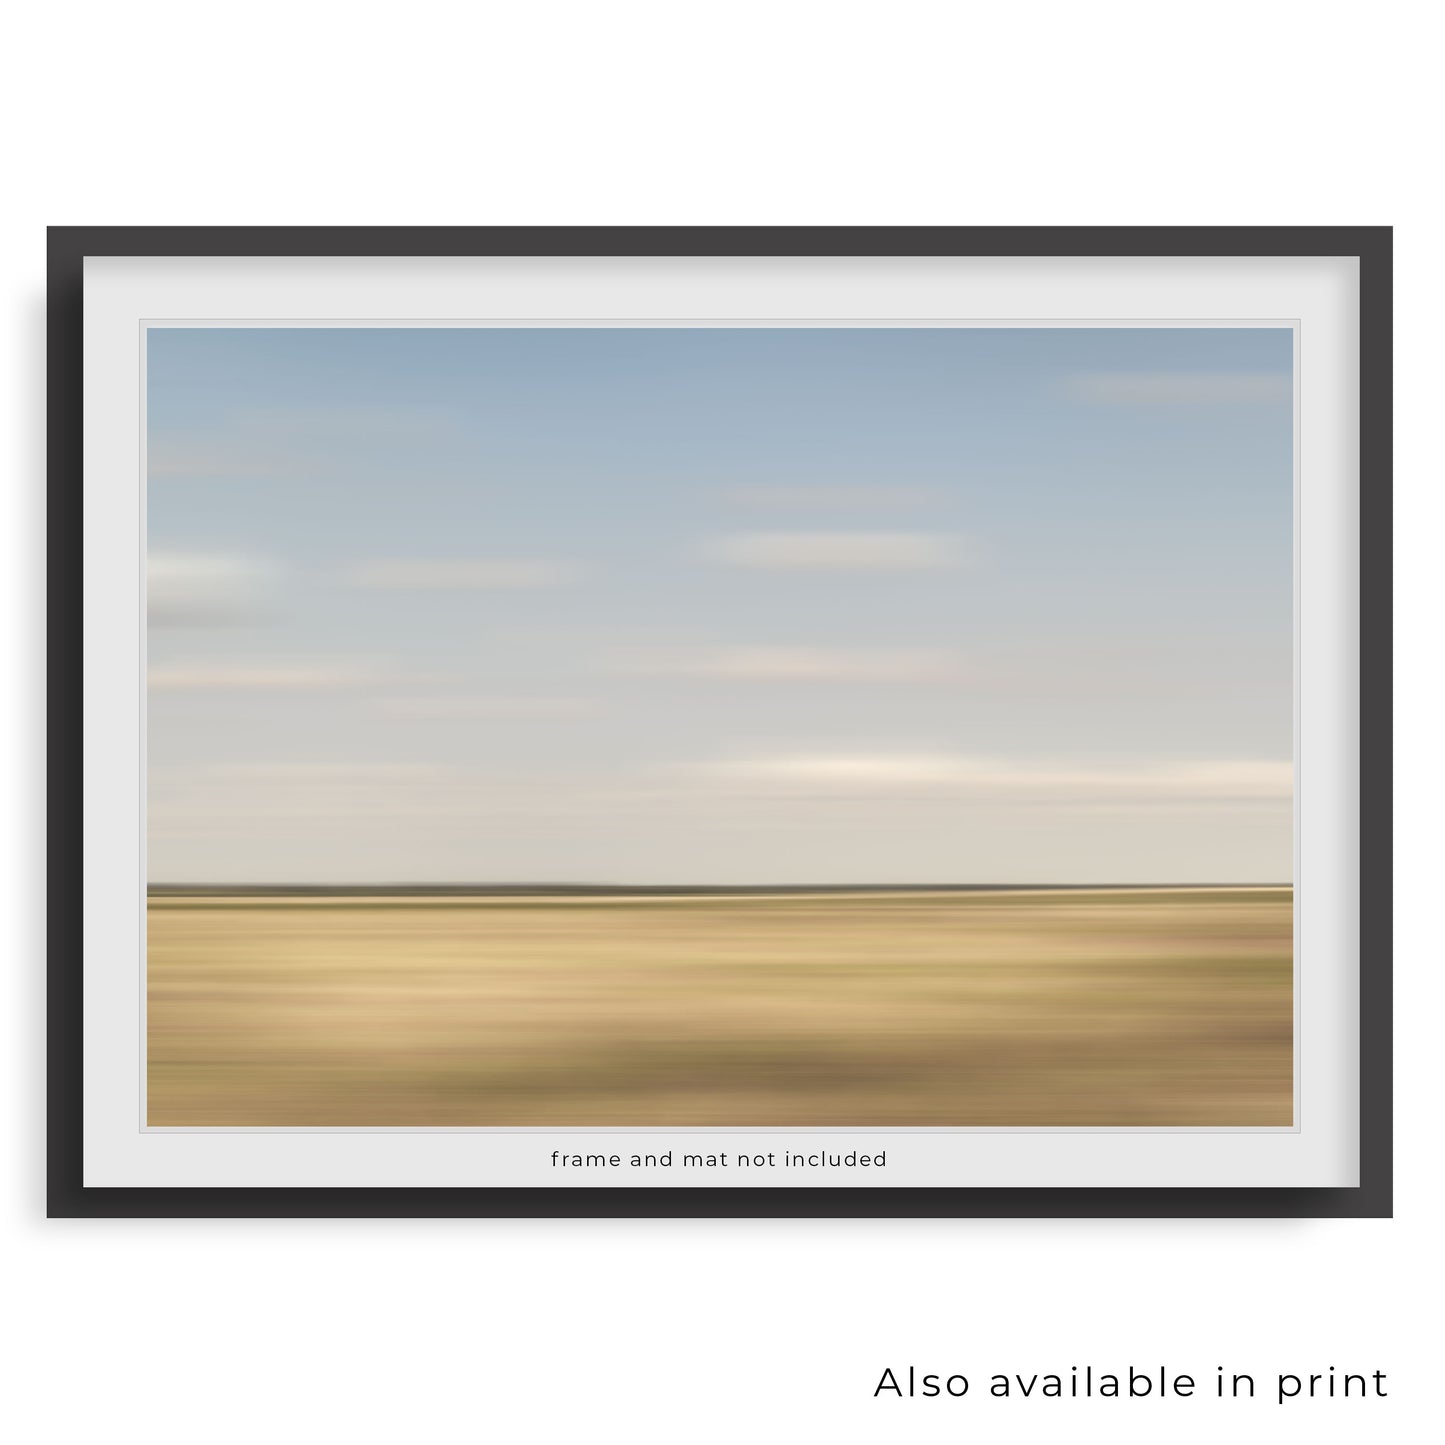 The Abstract Prairie photograph is beautifully presented as a framed print, showing this photograph is also available as a paper print. Please note that the frame and mat shown are for display purposes only and are not included in the purchase.